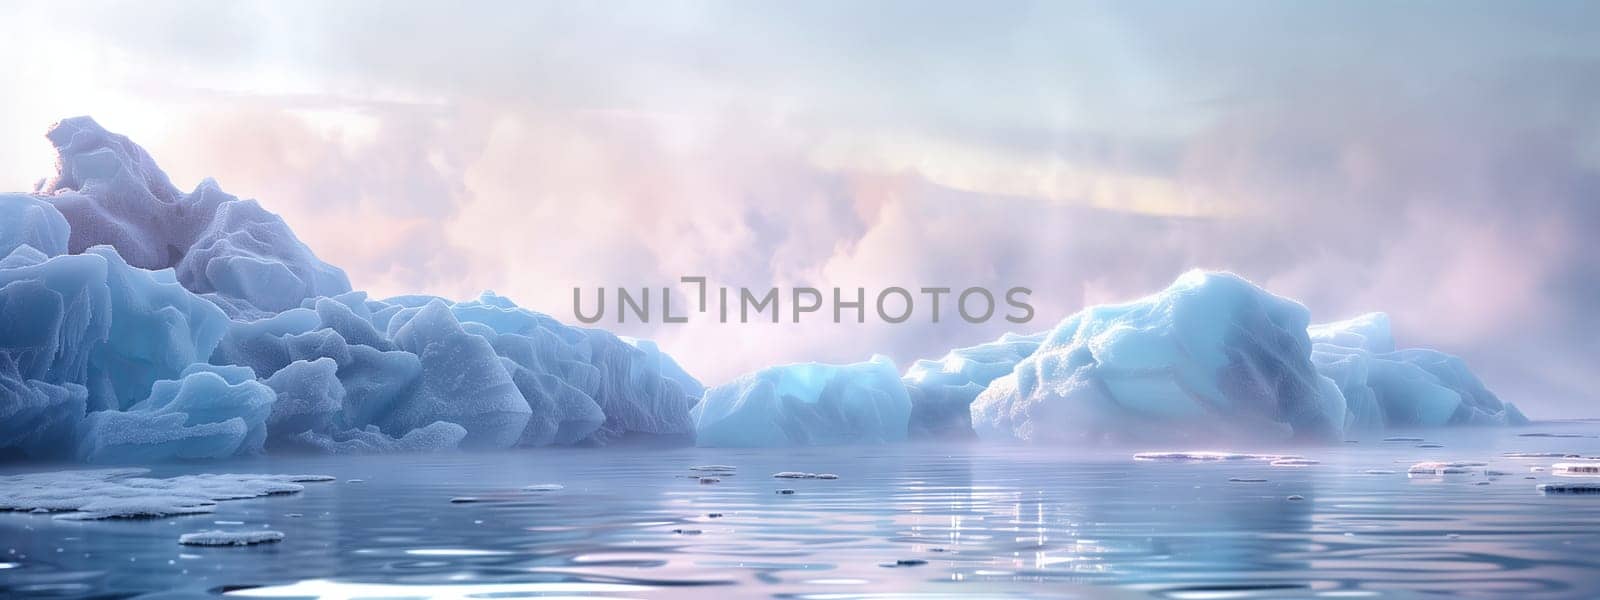 Icebergs float in the liquid water with mountains in the background. The sky is clear, creating a calm natural landscape with a beautiful horizon